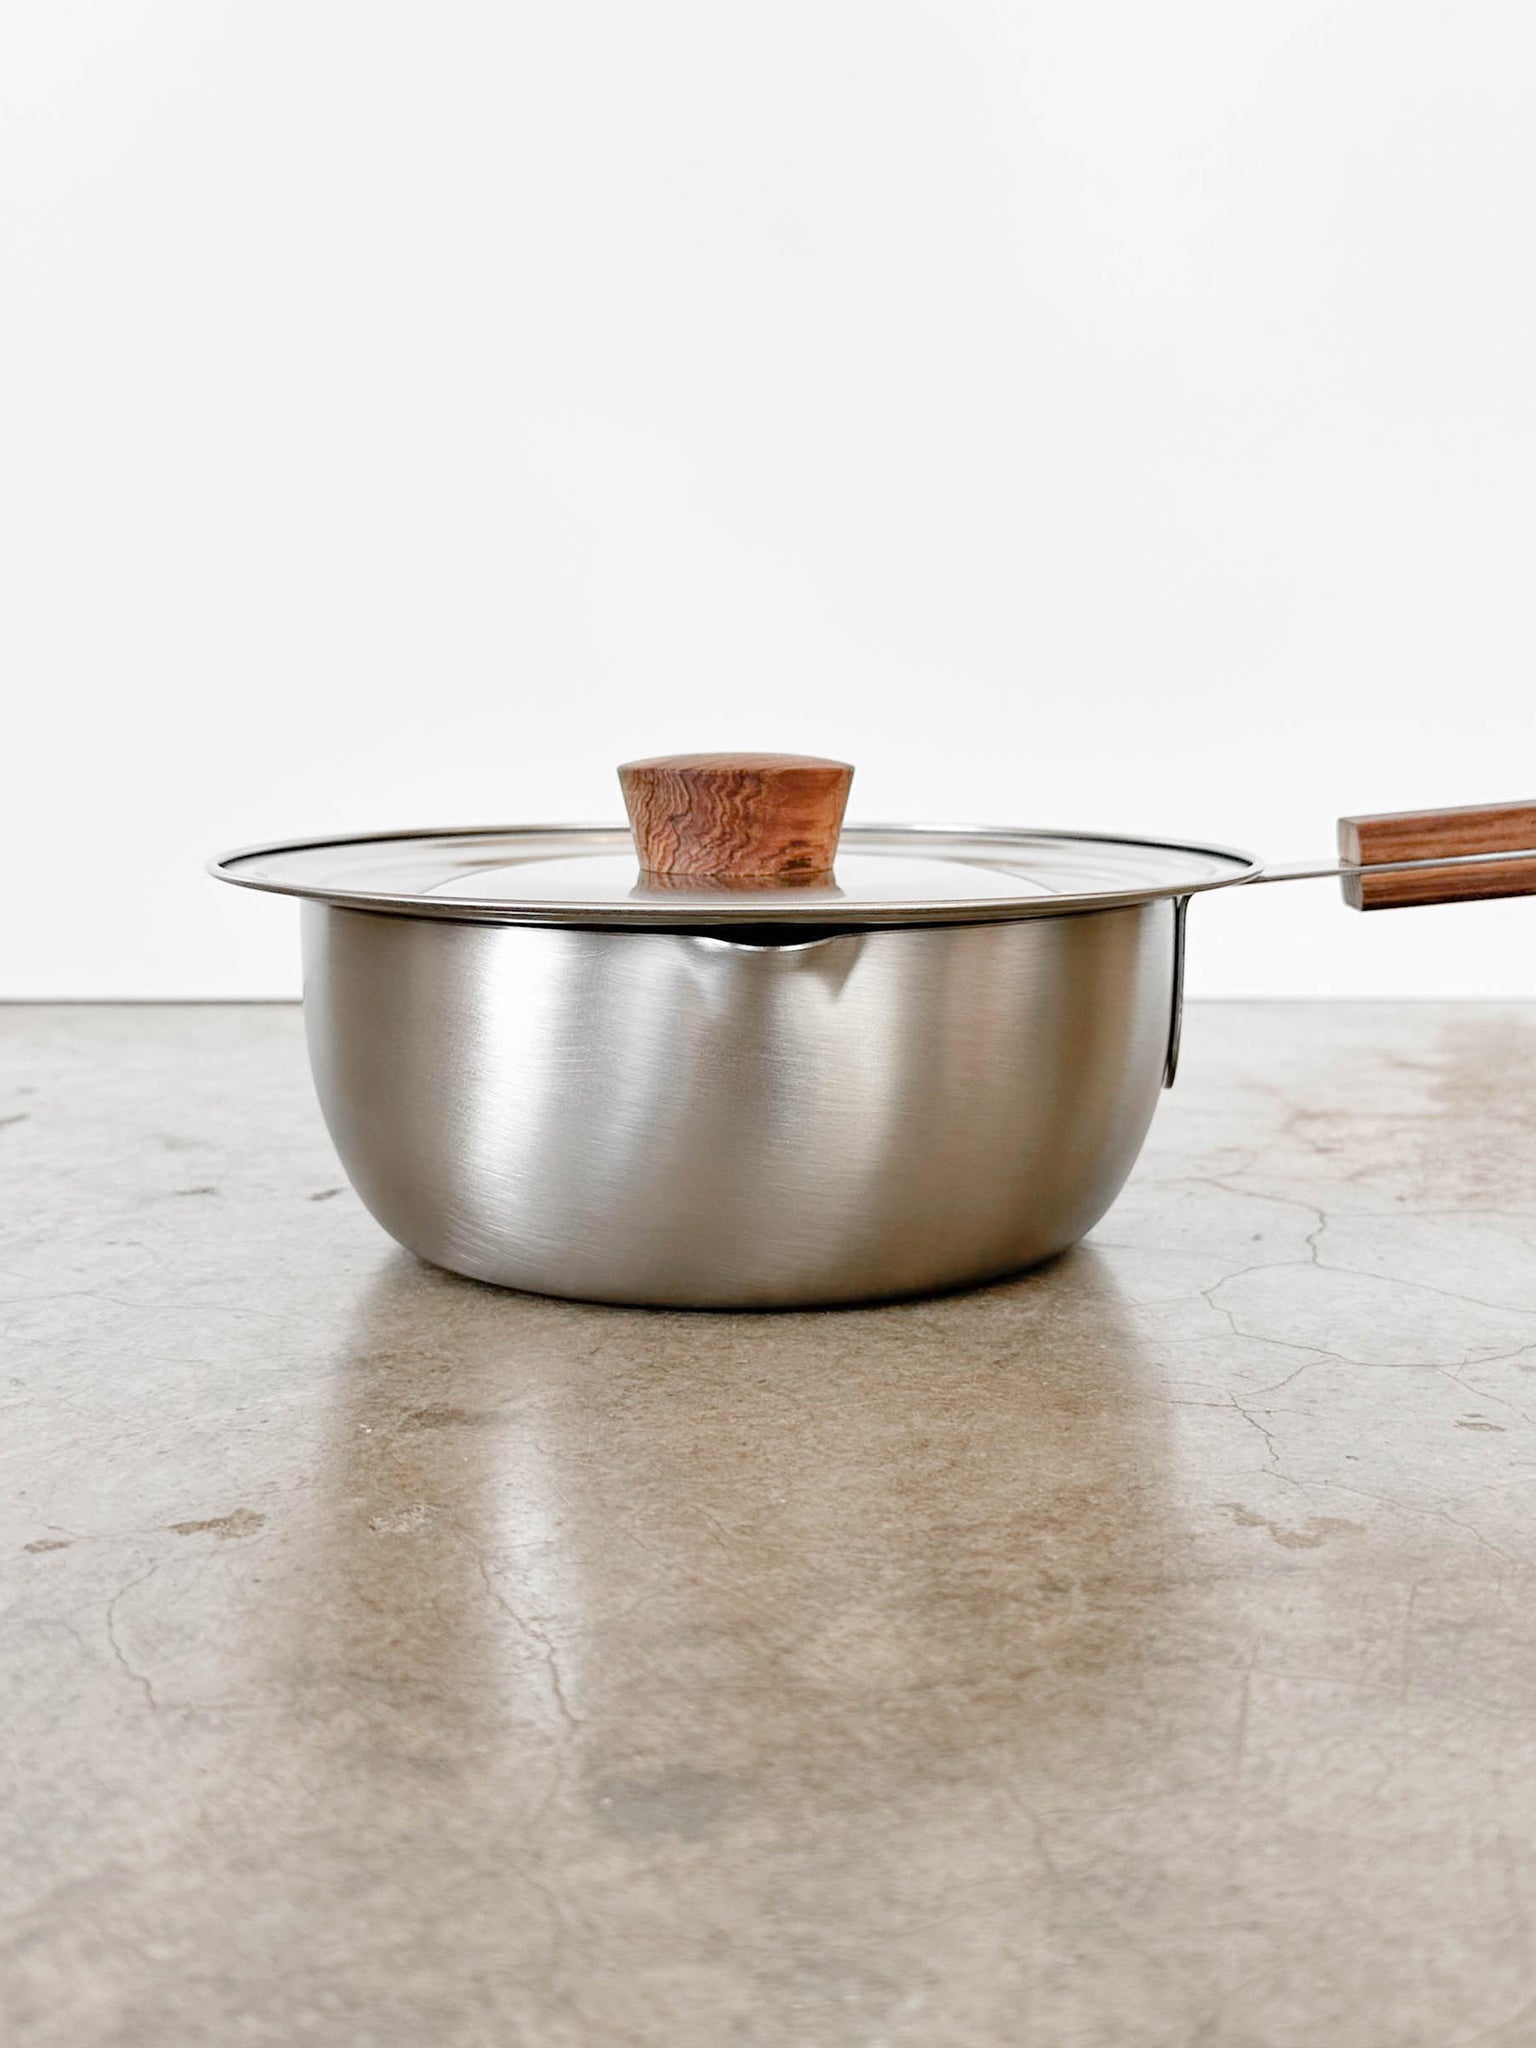 Stainless Steel Pot with Wood Handle showing spout | lifestyle